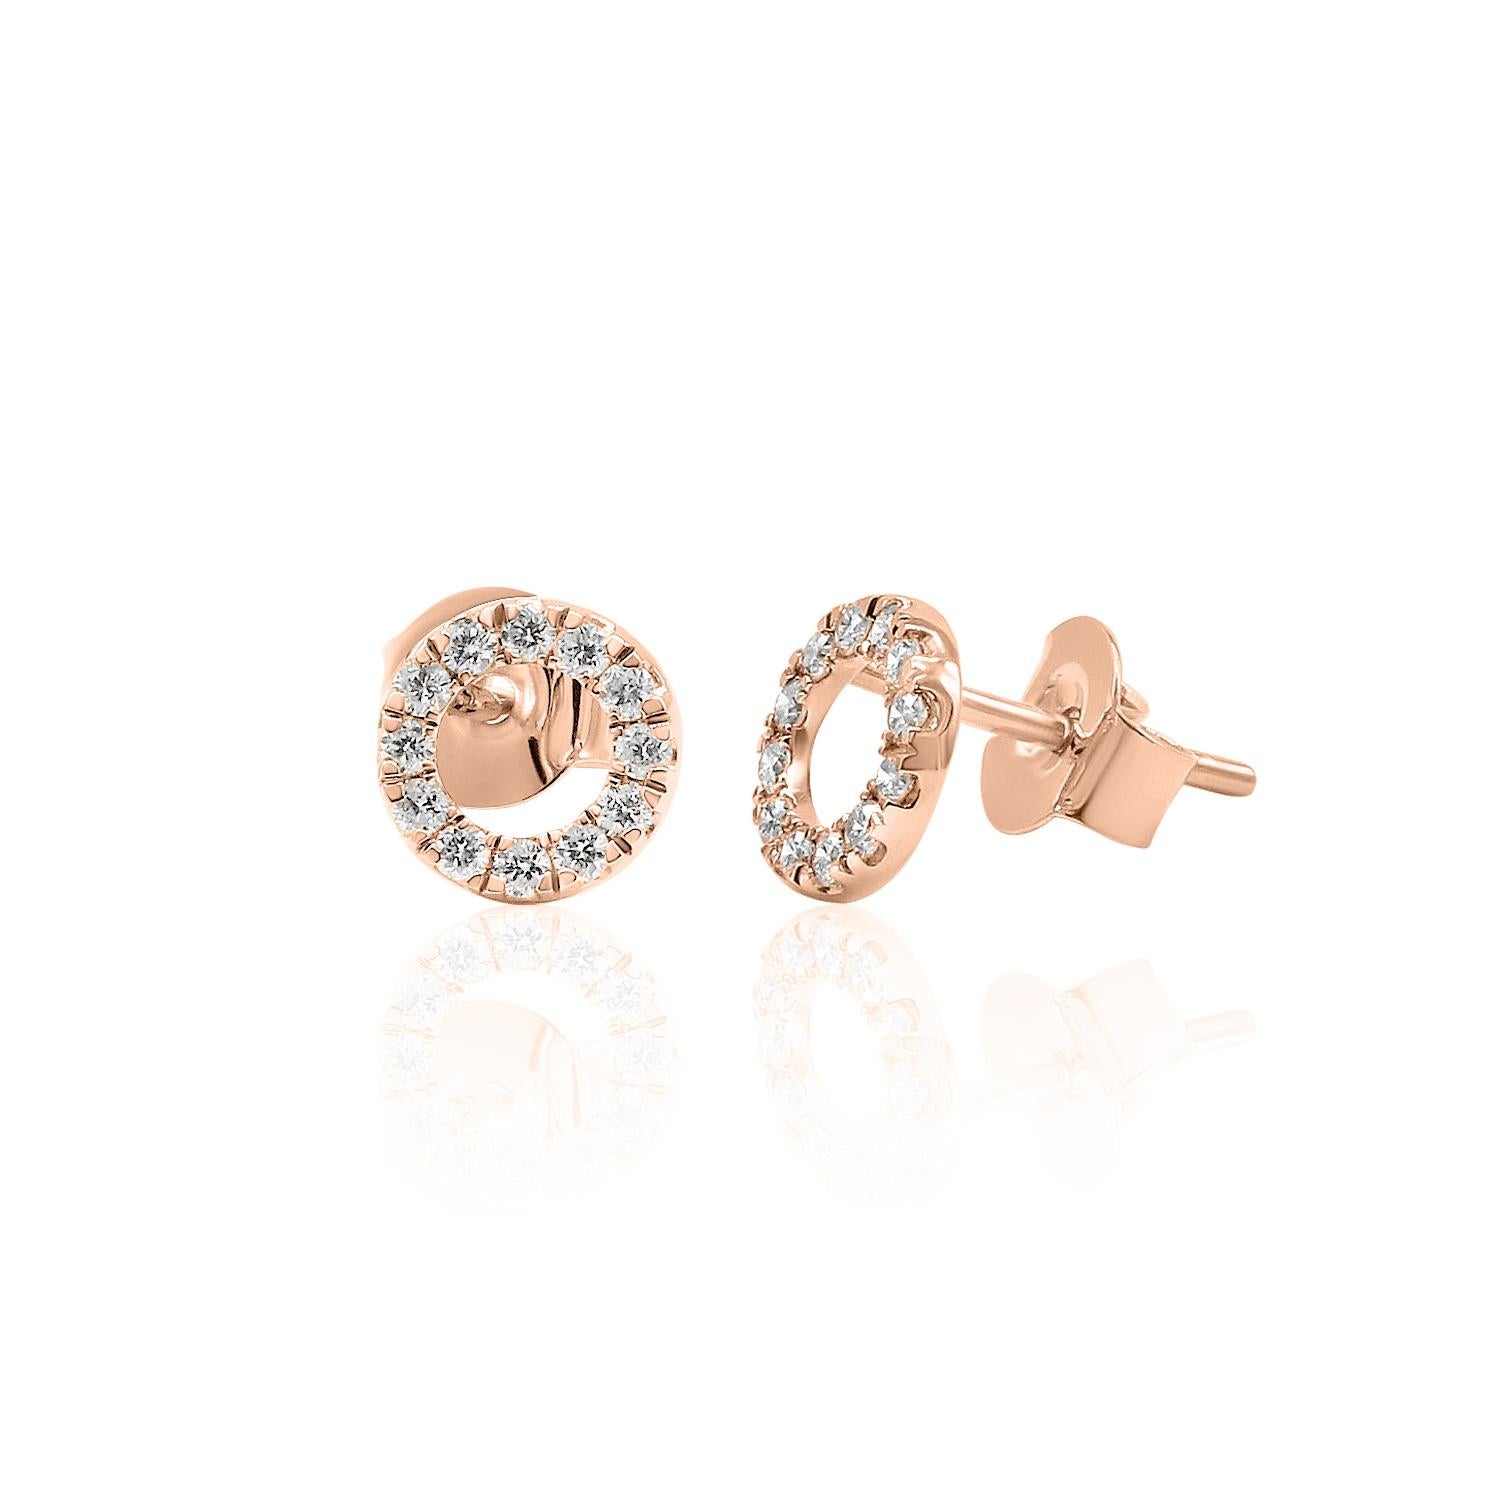 Contemporary Circle Diamond Stud Earrings 14K White, Yellow, and Rose Gold